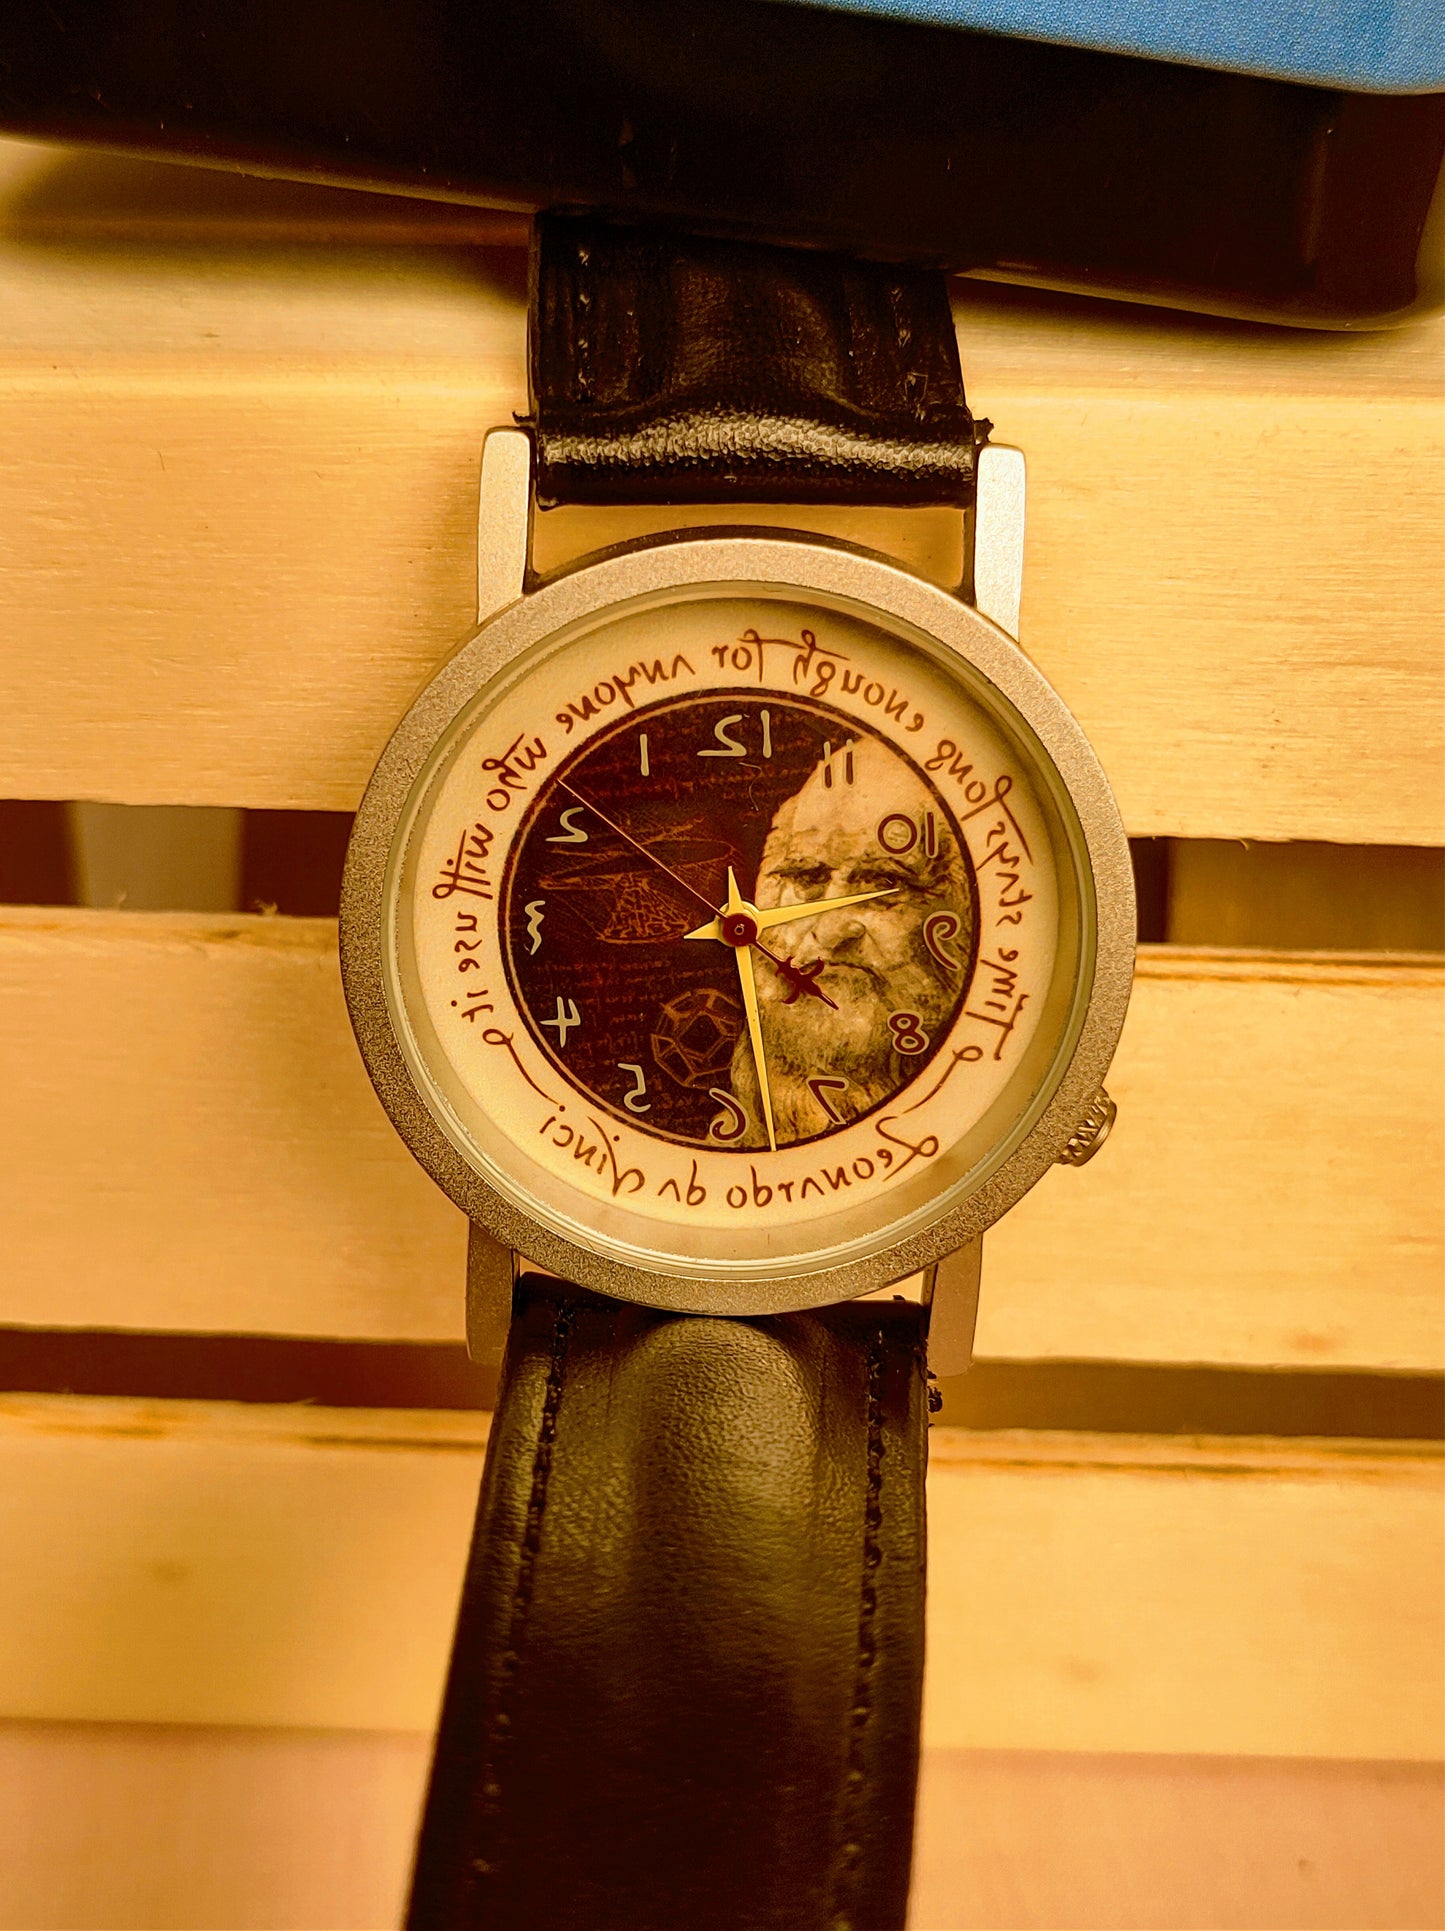 Tempus Fugit 33mm case .,black leather strap.. Leonardo da Vinci is on the dial and everything is backwards, the watch rotates backwards beautiful watch like new condition comes with case